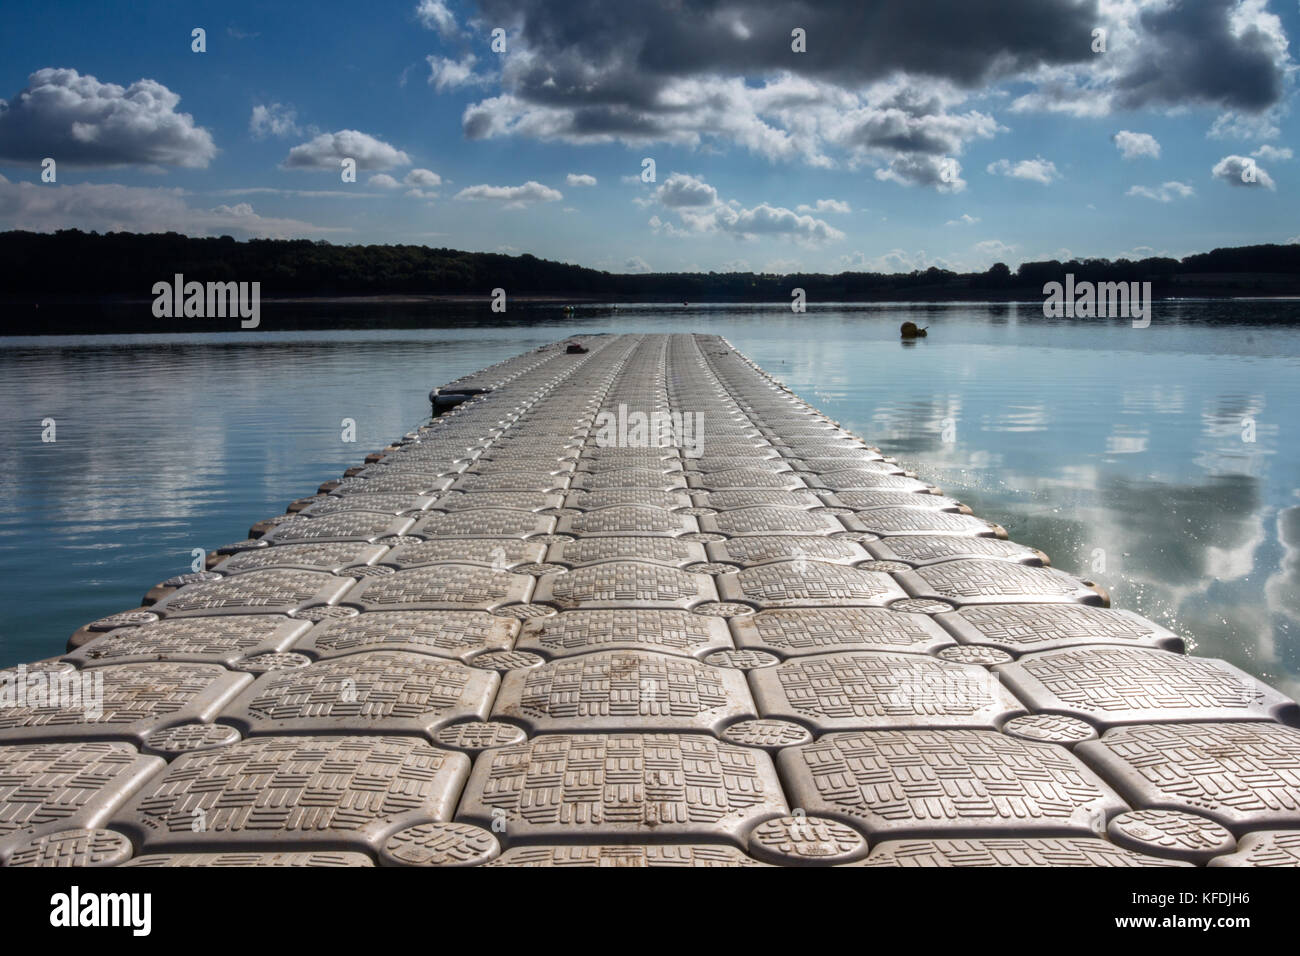 Floating Plastic Pontoon Jetty At Bewl Water Kent In September 2017 On A Sunny Day With Blue Sky With Clouds And Still Calm Water Stock Photo Alamy